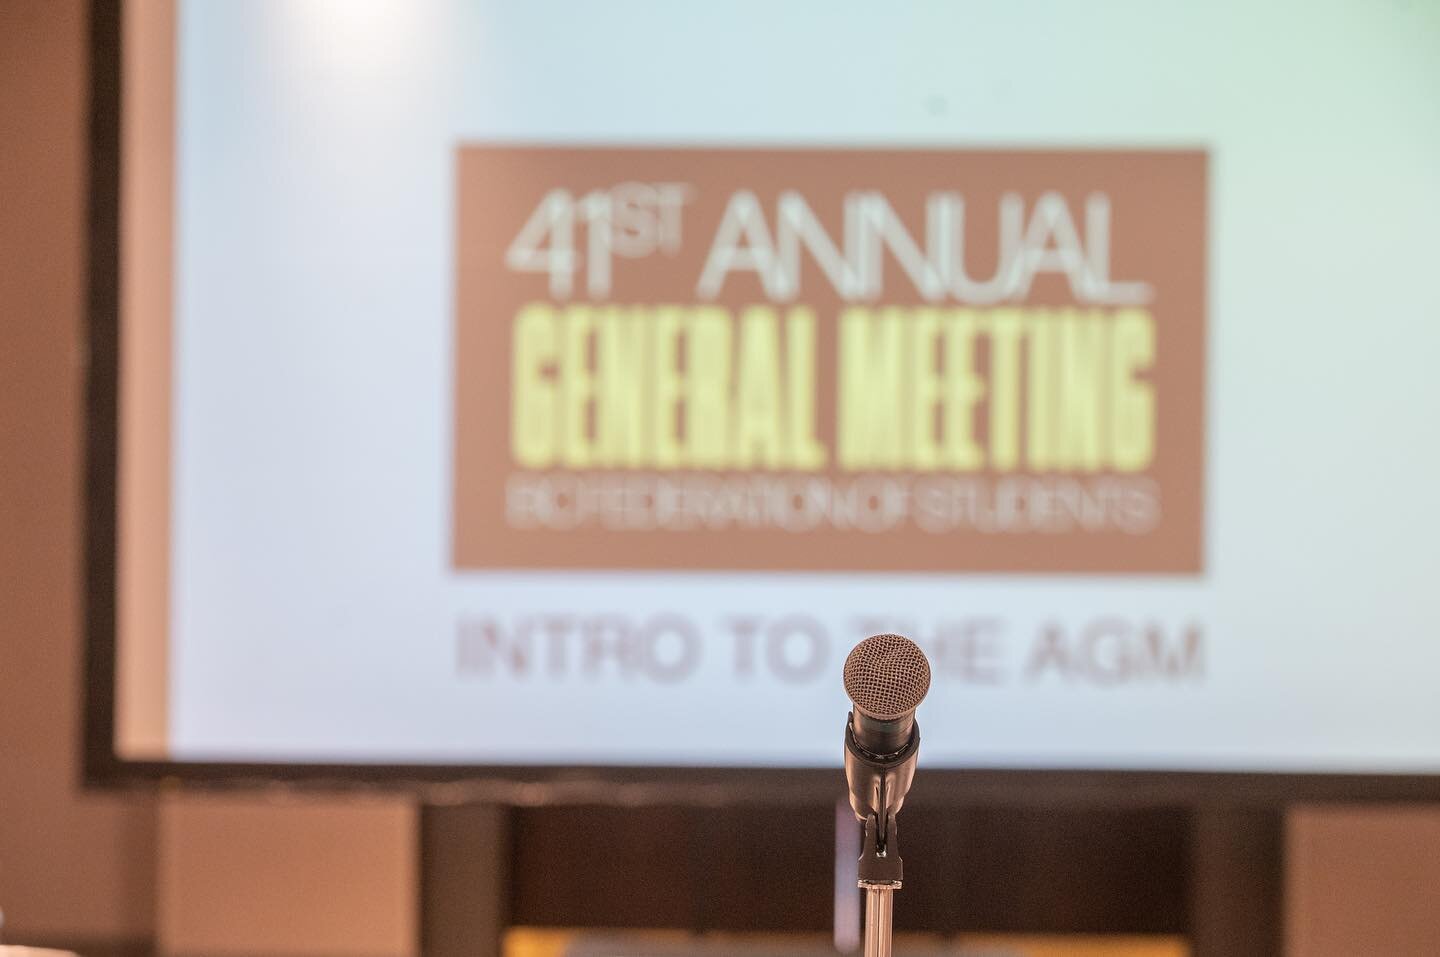 We&rsquo;re excited to welcome so many smiling faces to our 41st Annual General Meeting this weekend! Delegates will hear from speakers and take part in workshops to discuss current issues facing students.